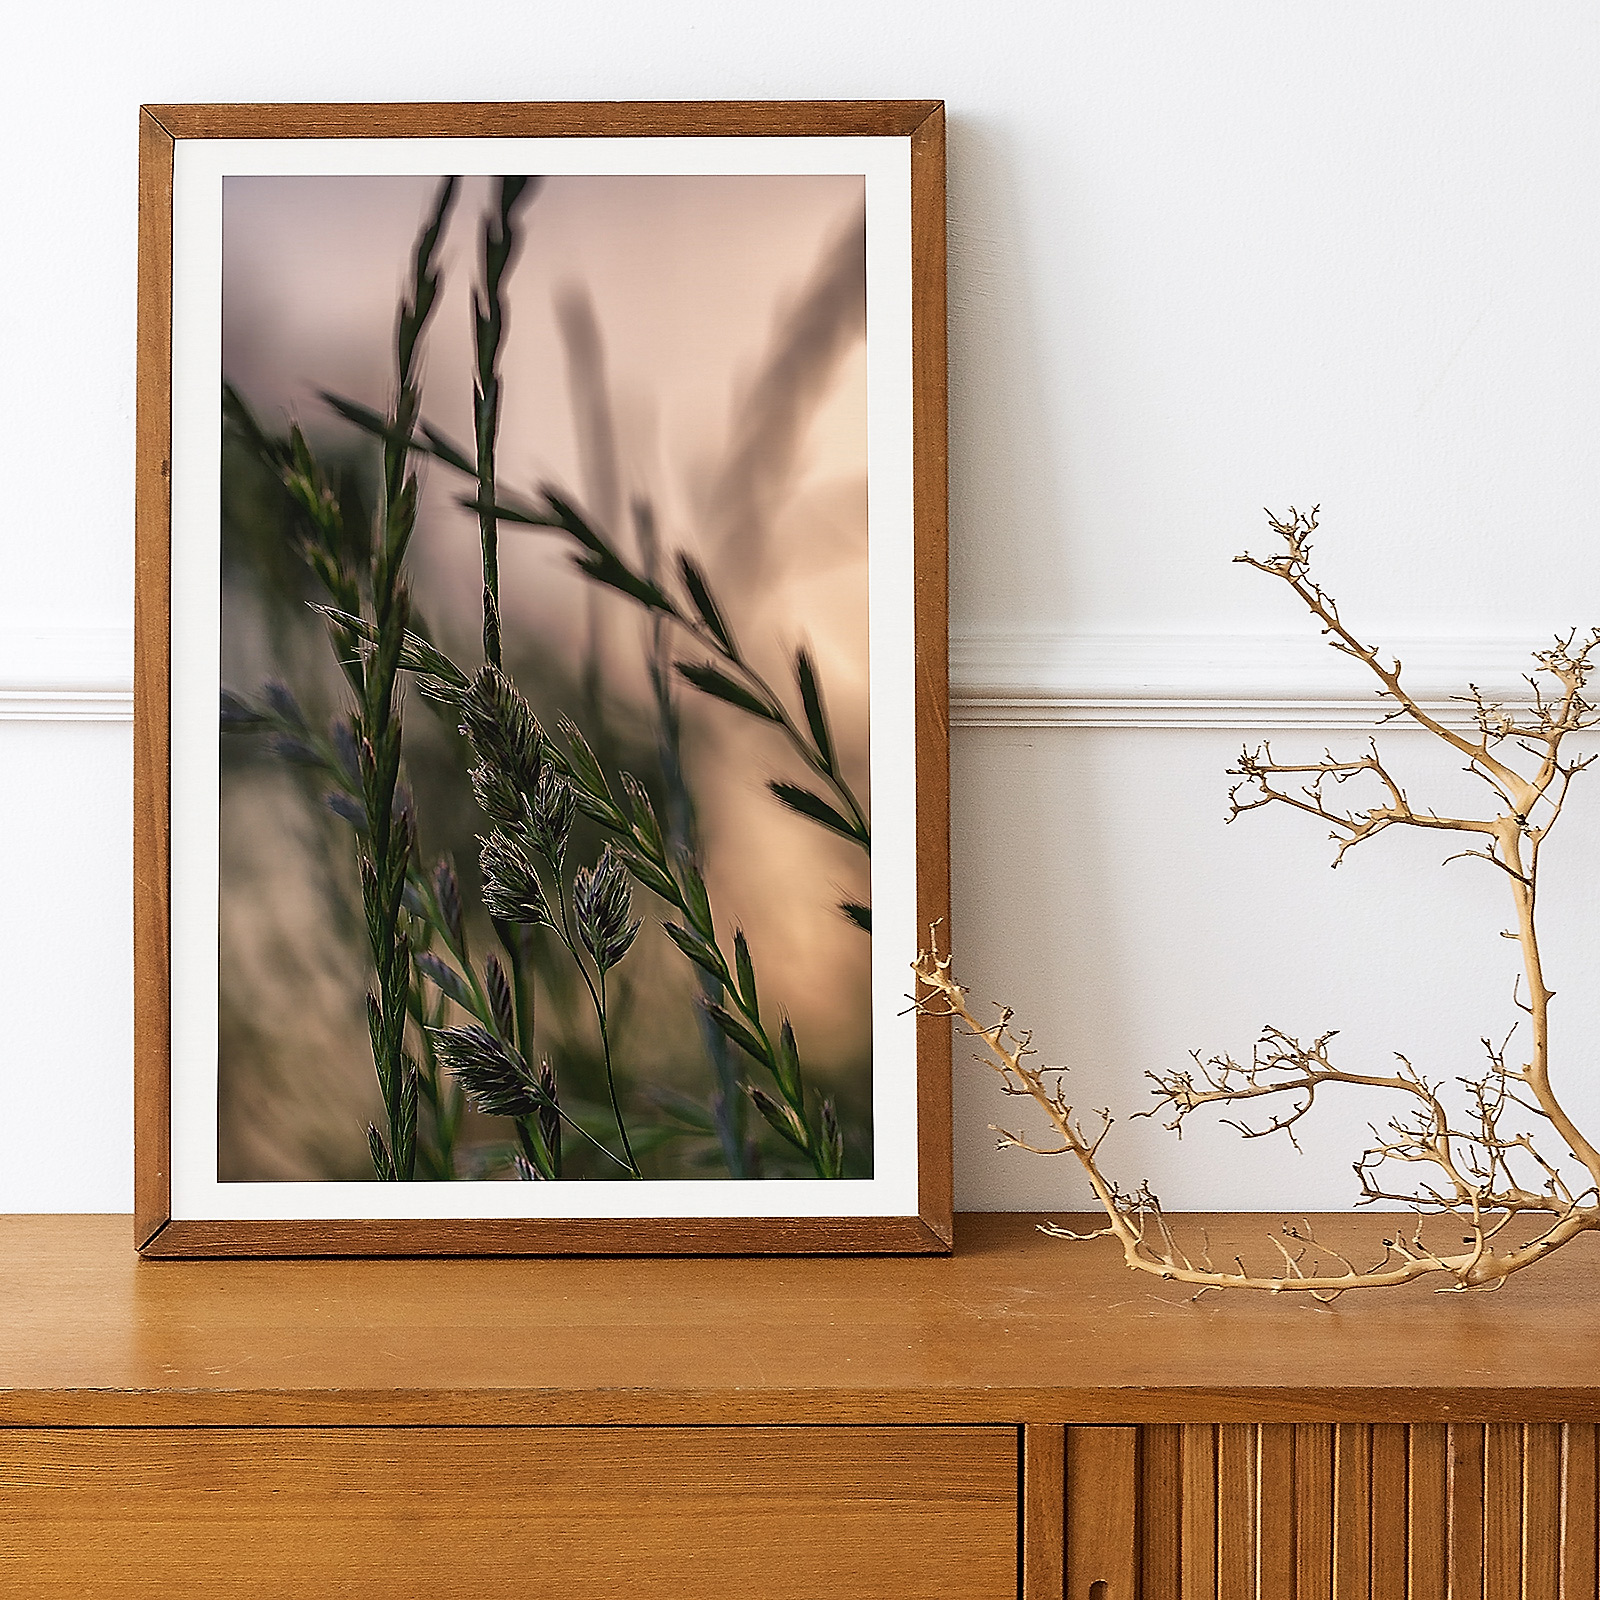 Close-up macro photograph of meadow grass in evening light, framed in a light wooden frame, standing on top of a wooden sideboard. A wooden bare branch decorates the right side of the sideboard.